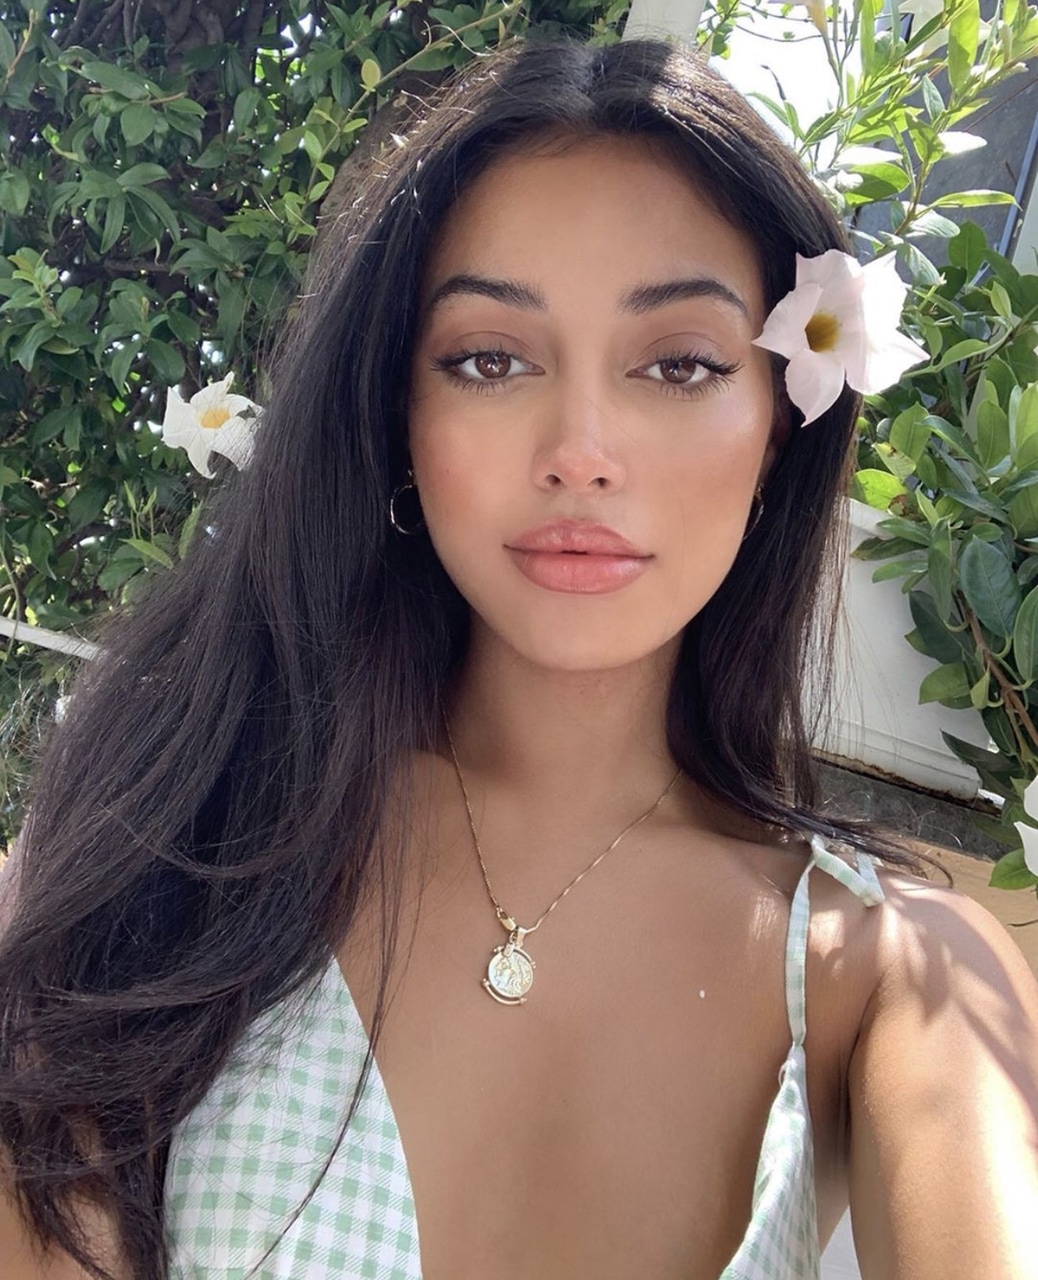  Cindy Kimberly - People who became Popular Overnight in the World from Social Media